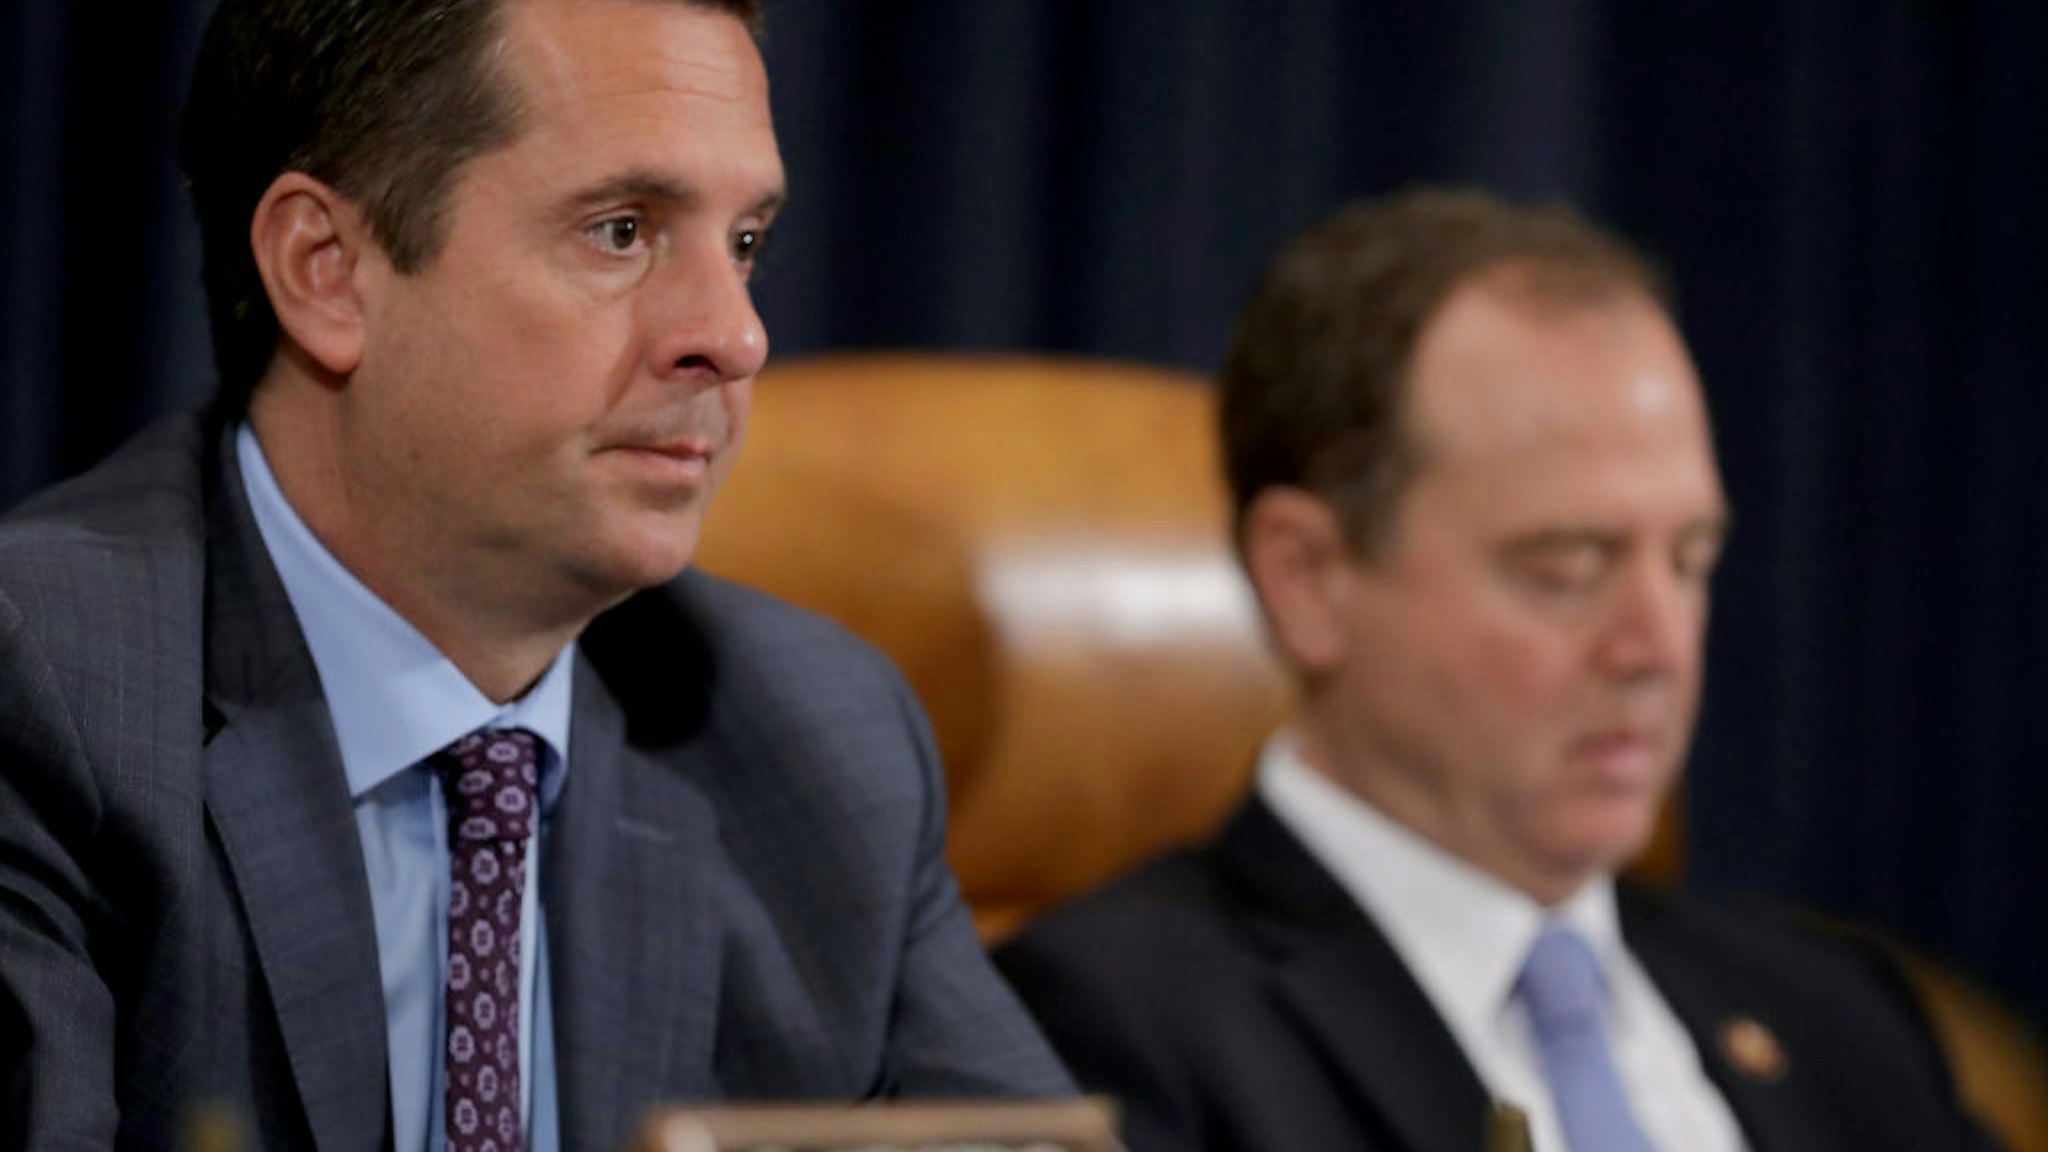 House Intelligence Committee ranking member Rep. Devin Nunes (R-CA) listens to testimony from experts on the subject of 'deepfakes,' digitally manipulated video and still images, during a hearing in the Longworth House Office Building on Capitol Hill June 13, 2019 in Washington, DC.